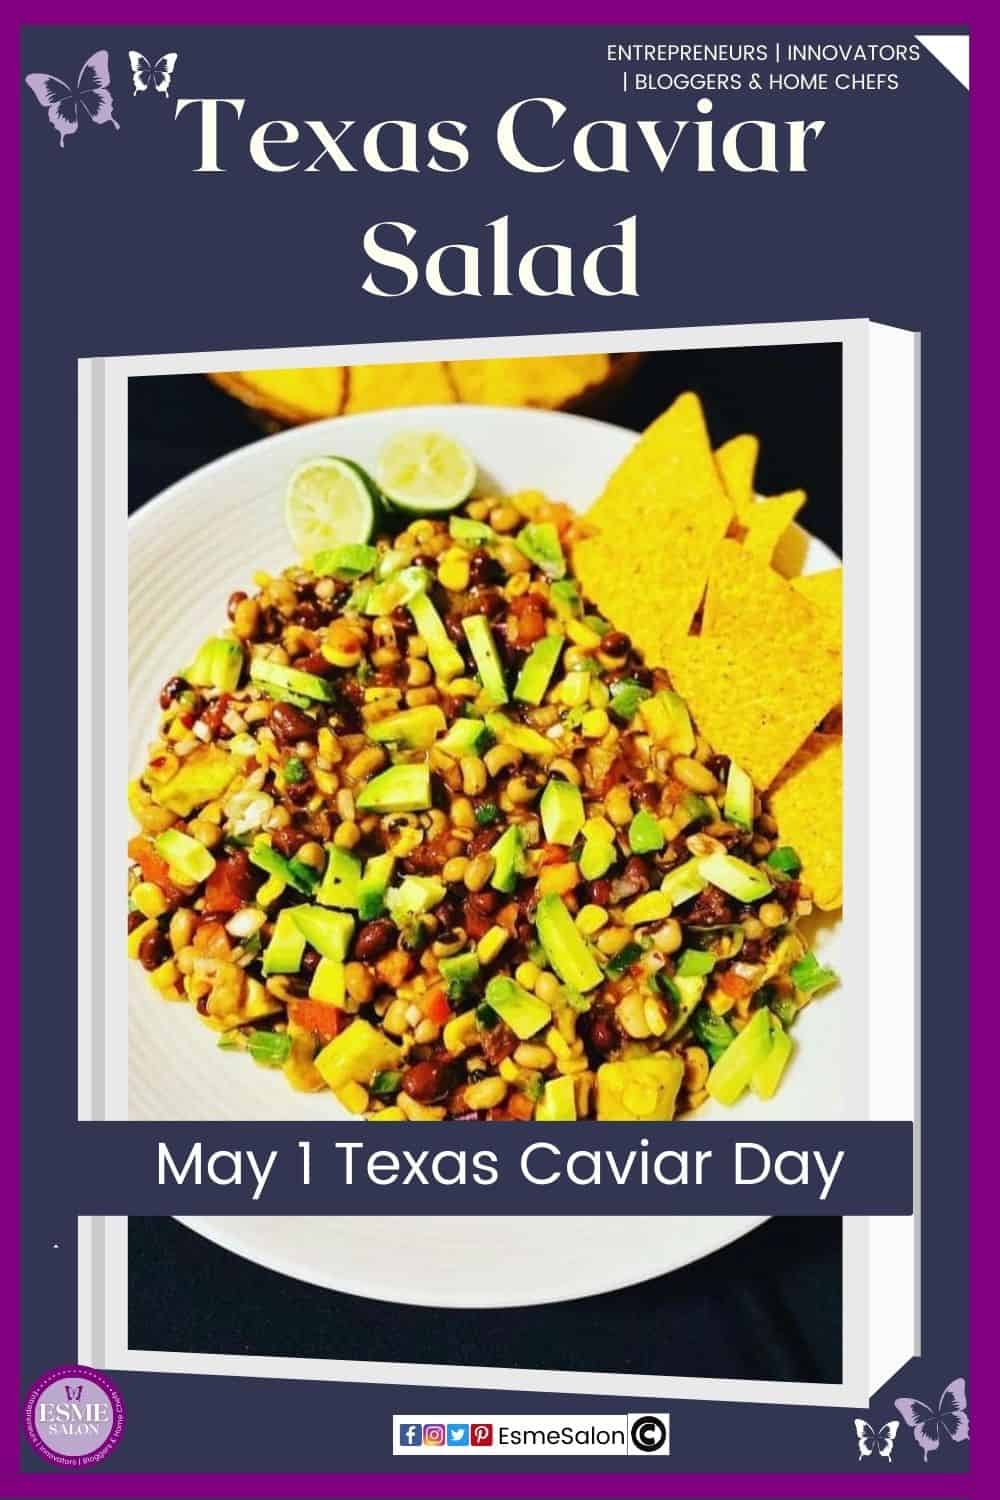 an image of Texas Caviar Salad with in a light dressing served with tortilla chips